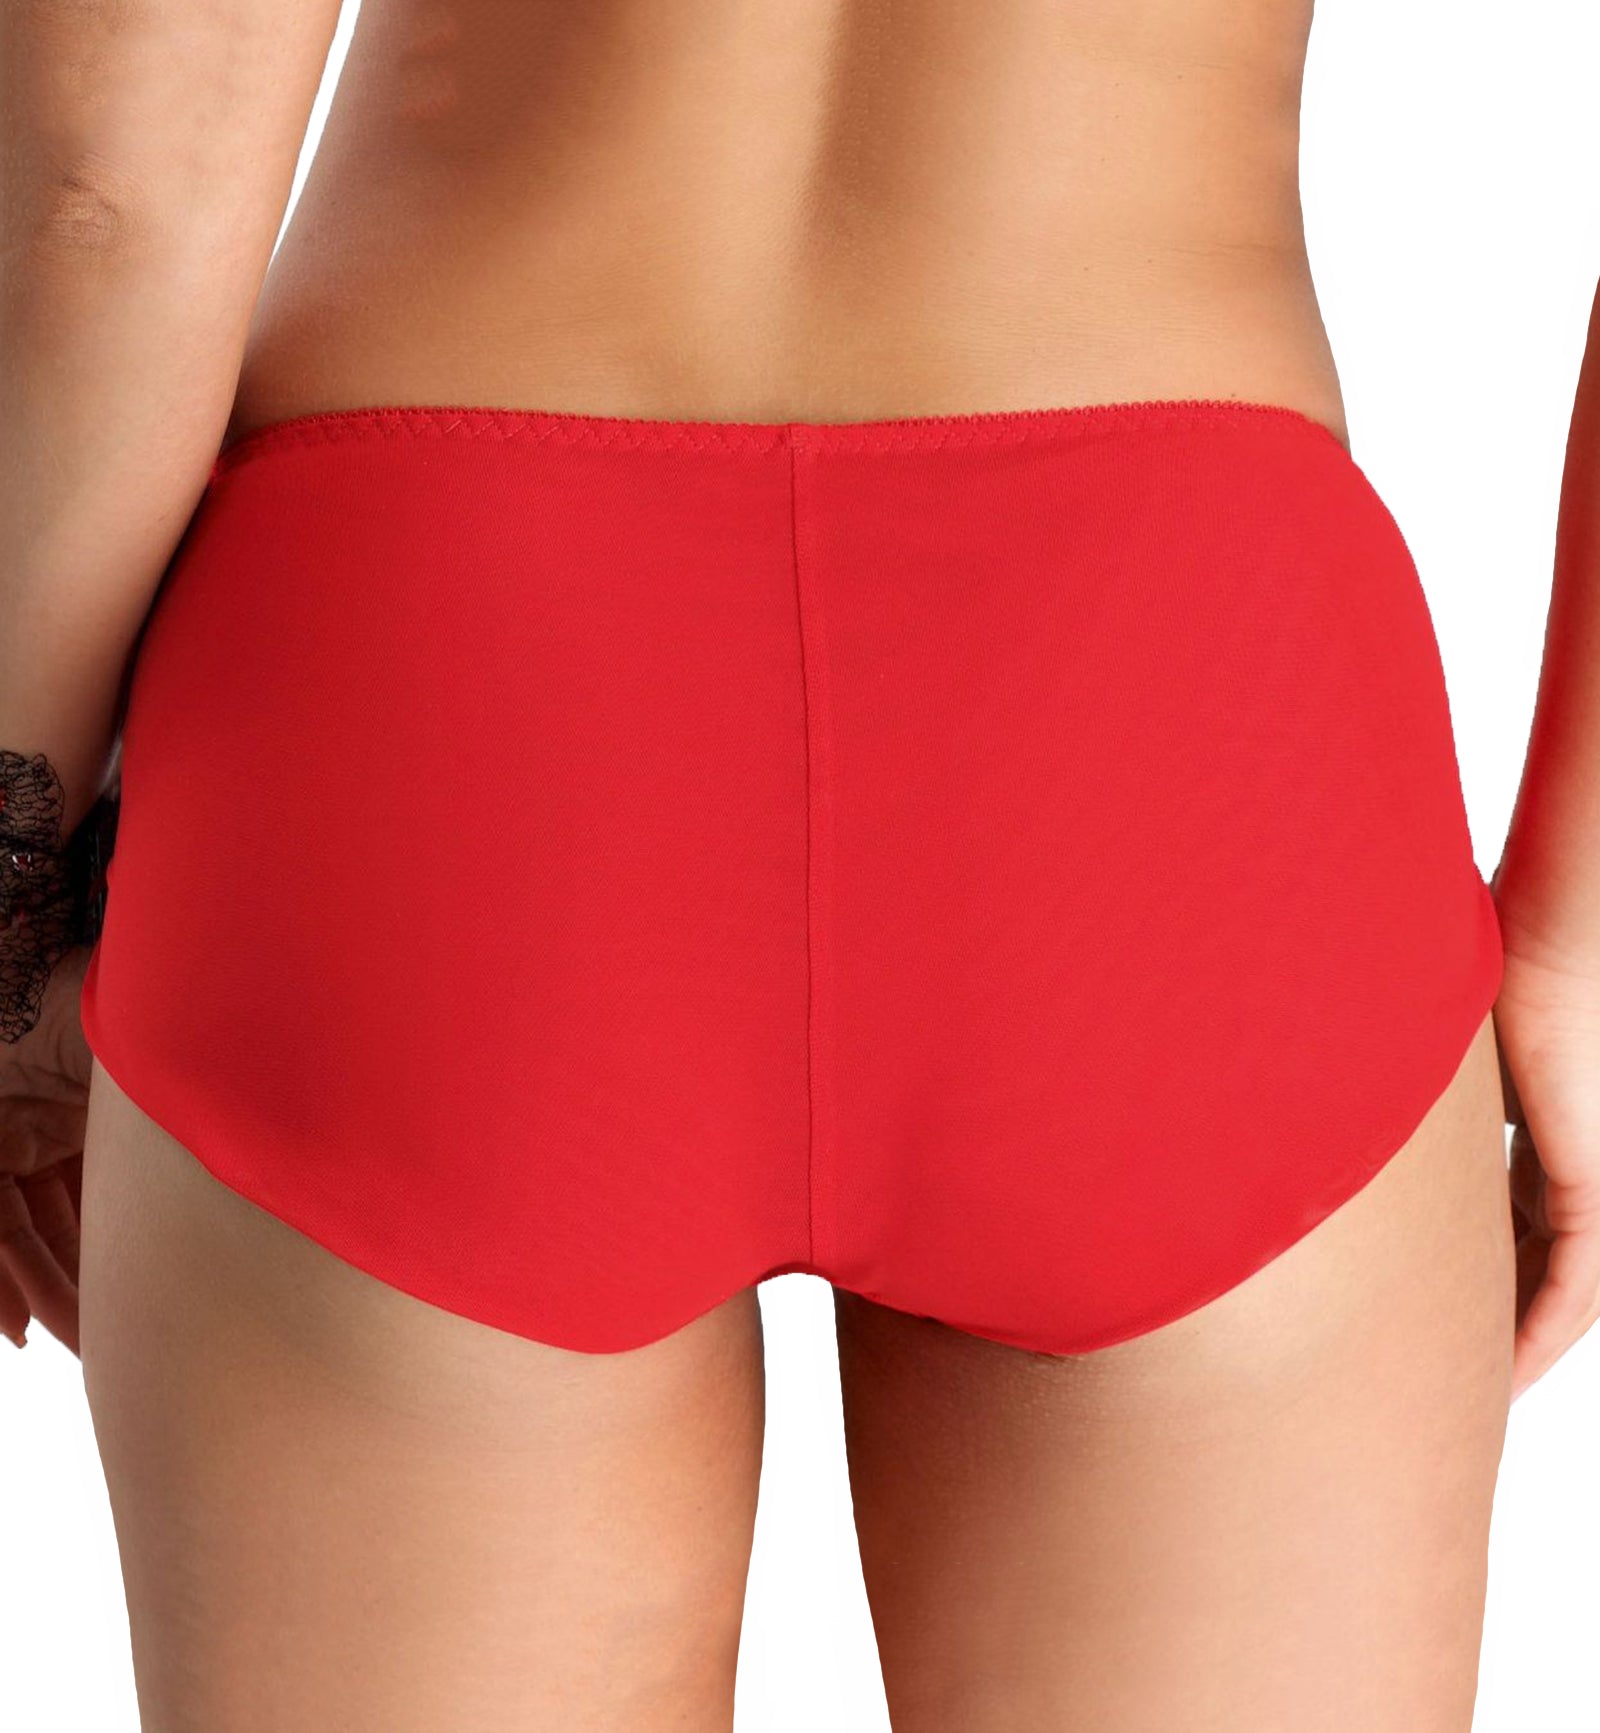 Nessa Sonata Hipster Brief (N03),S,Red - Red,S